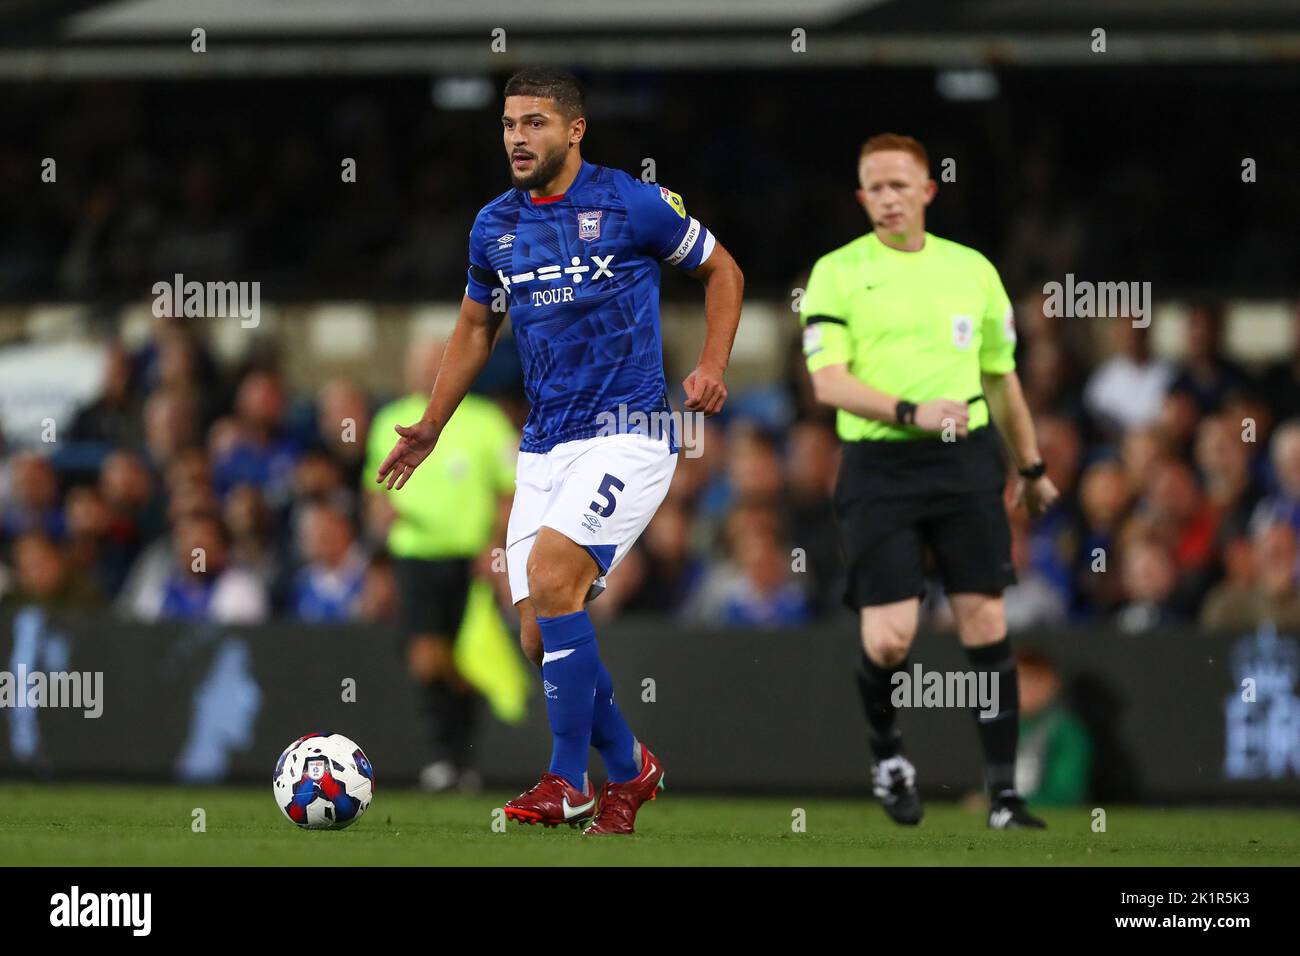 Sam Morsy of Ipswich Town - Ipswich Town v Bristol Rovers, Sky Bet League One, Portman Road, Ipswich, UK - 13th September 2022  Editorial Use Only - DataCo restrictions apply Stock Photo